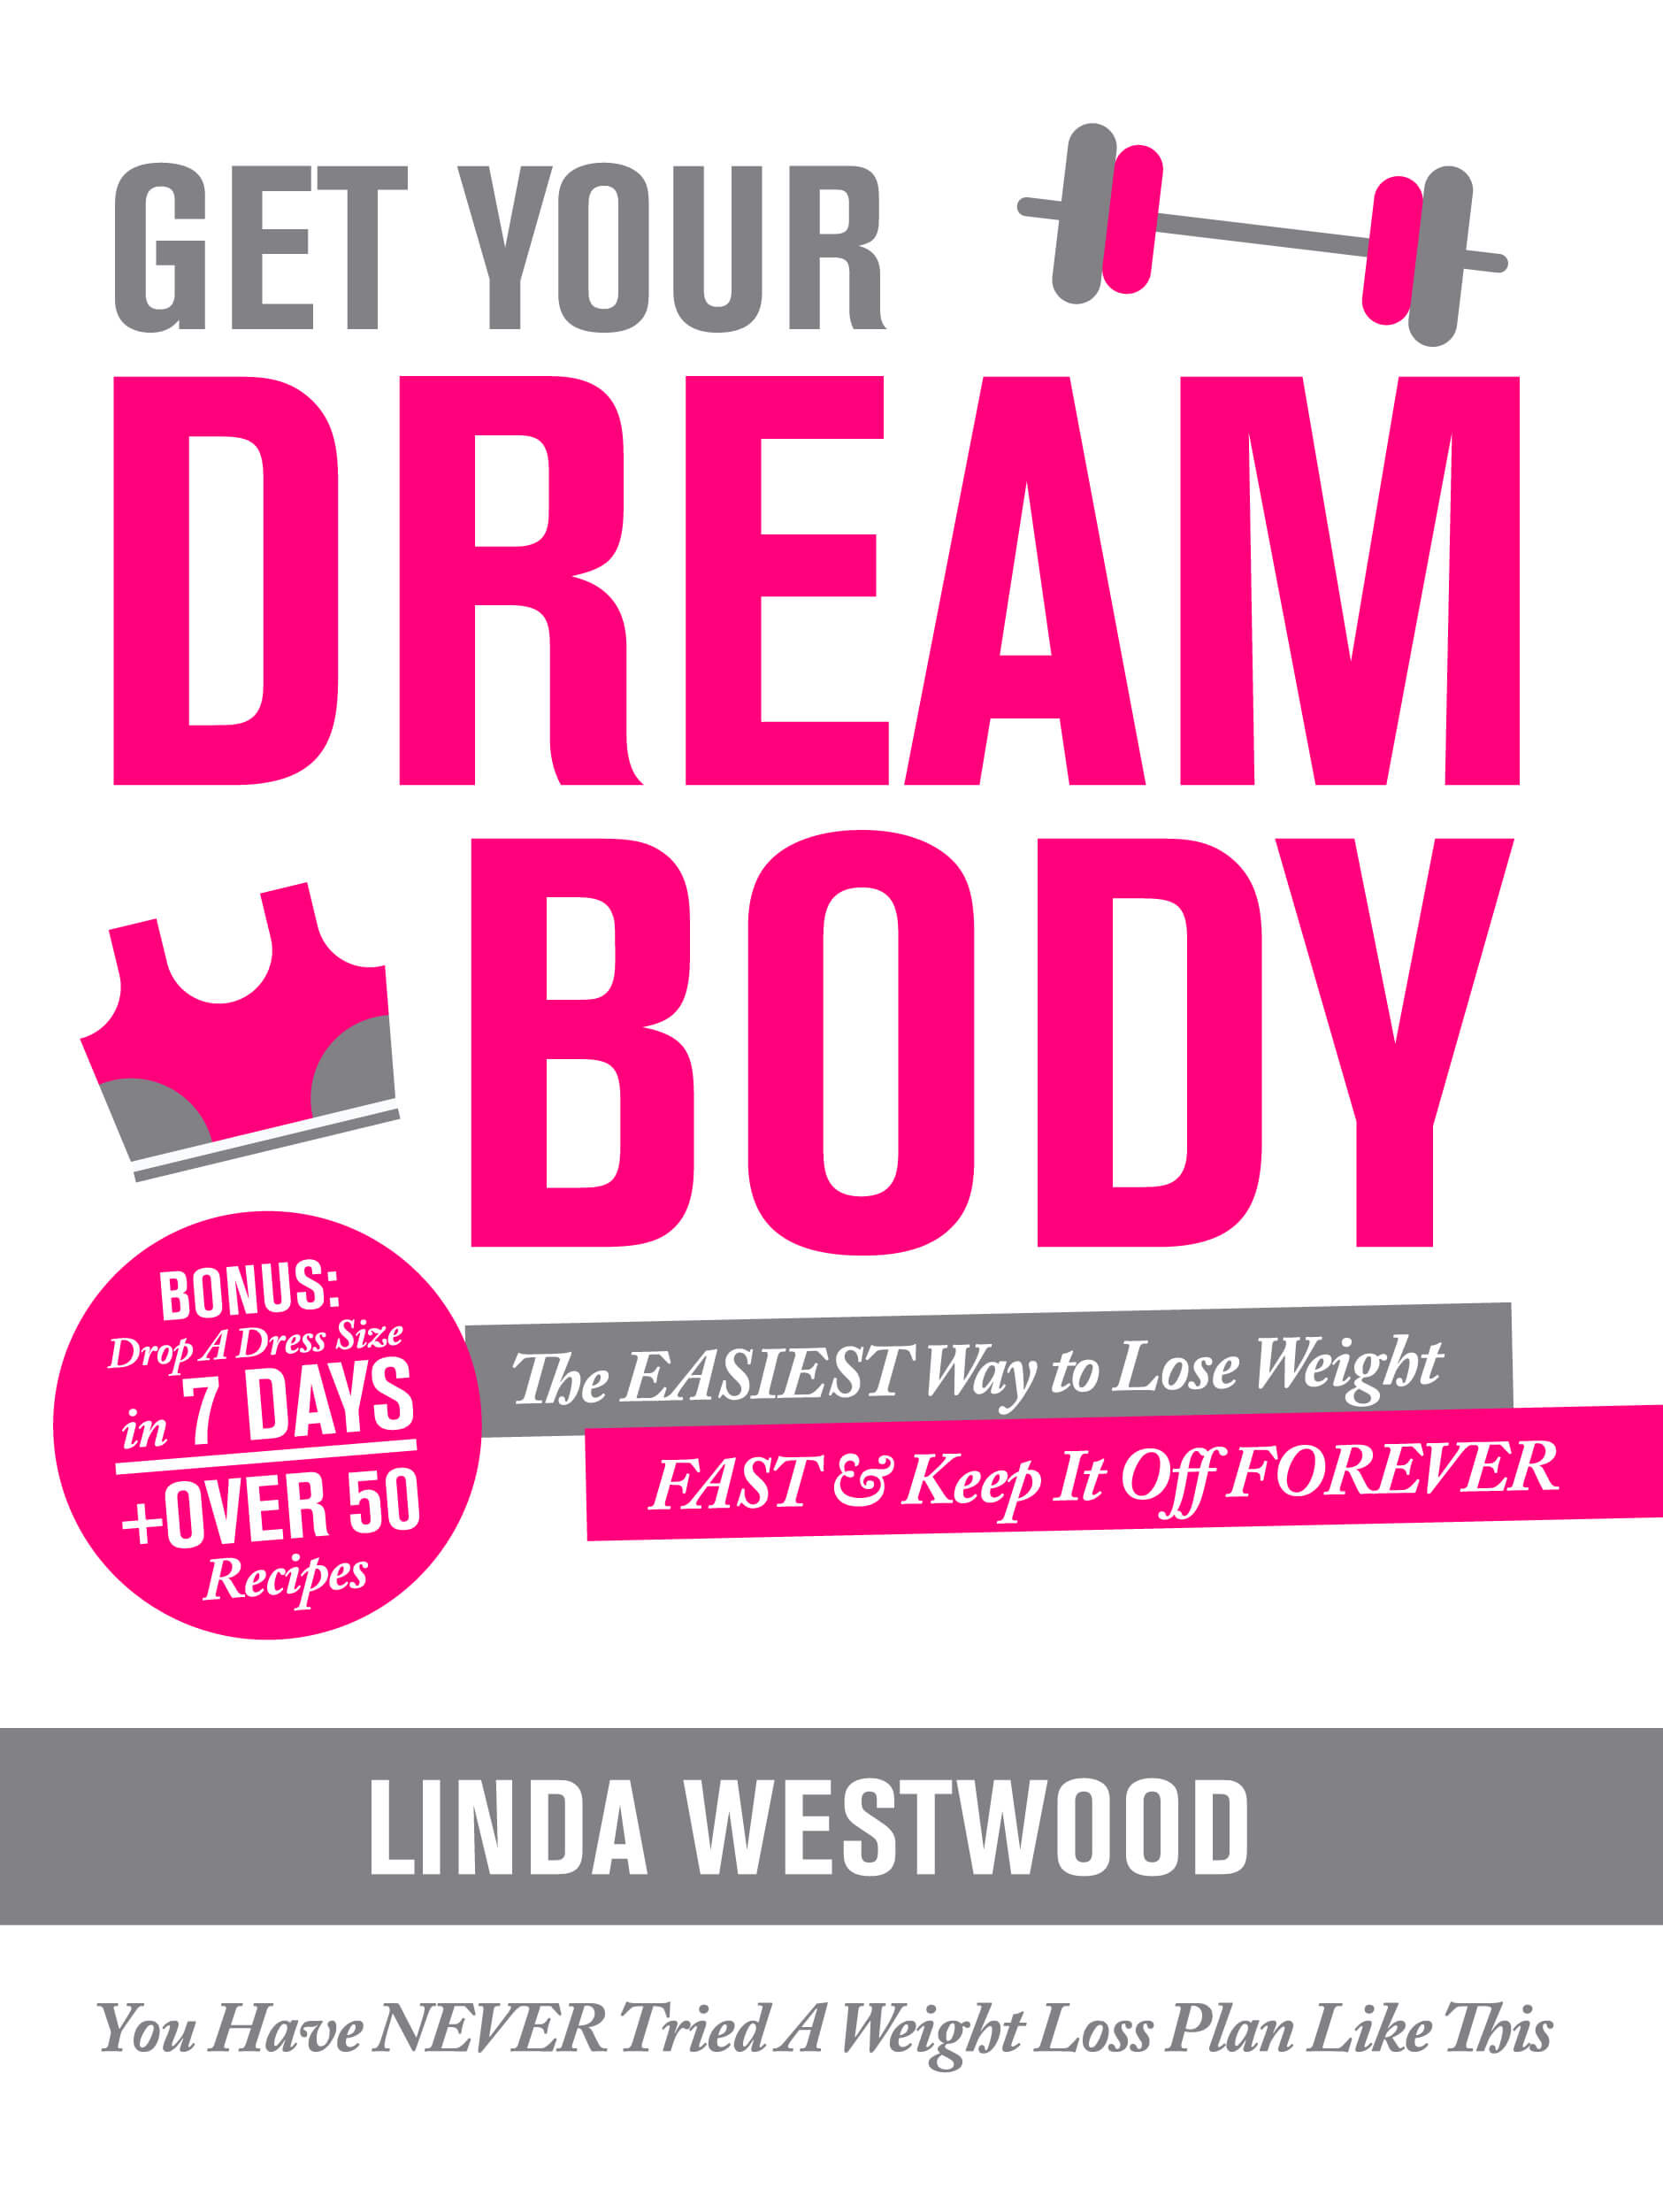 FREE: Get Your Dream Body: The EASIEST Way to Lose Weight FAST & Keep It Off FOREVER (You Have NEVER Tried A Weight Loss Plan Like This)! by Linda Westwood